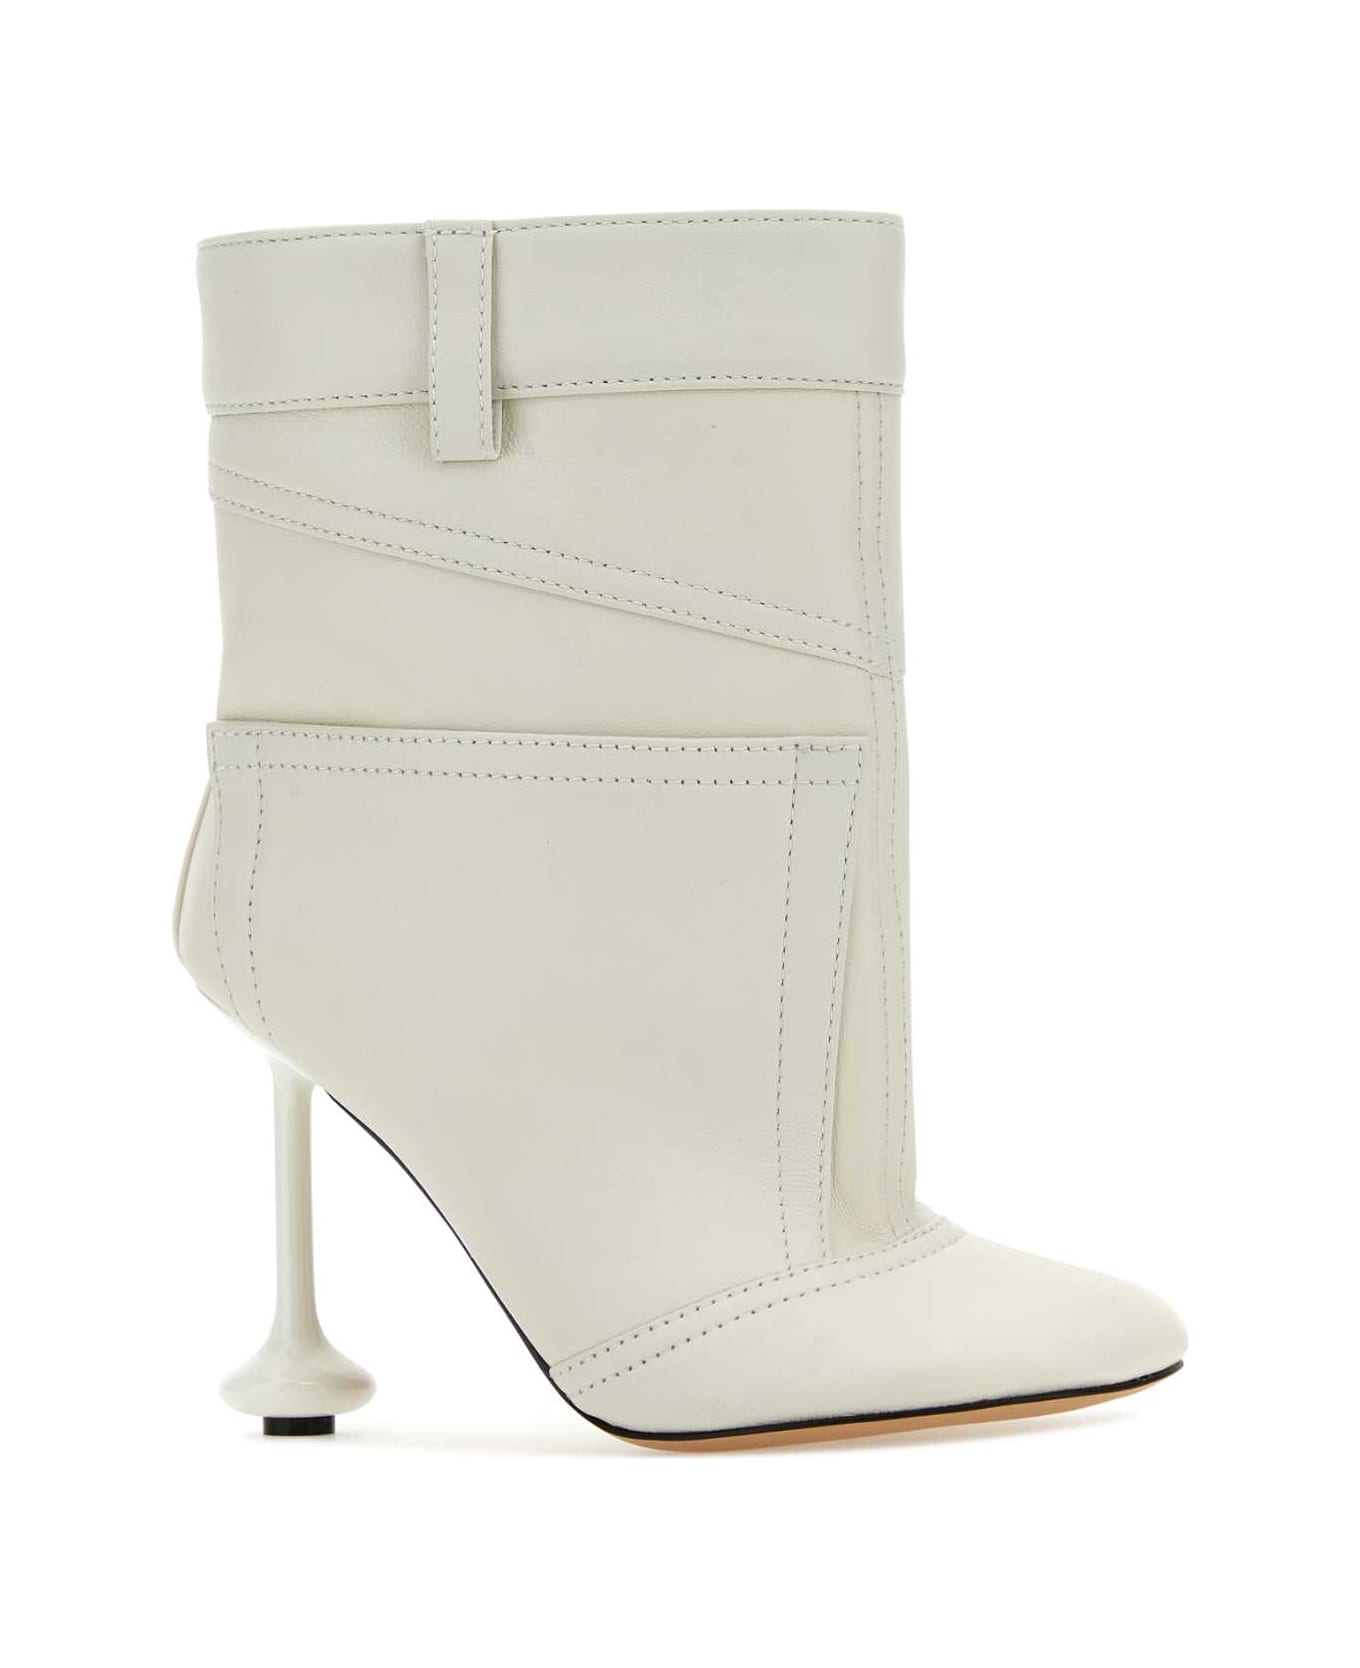 Loewe Ivory Nappa Leather Toy Ankle Boots - ANTHURIUMWHITE